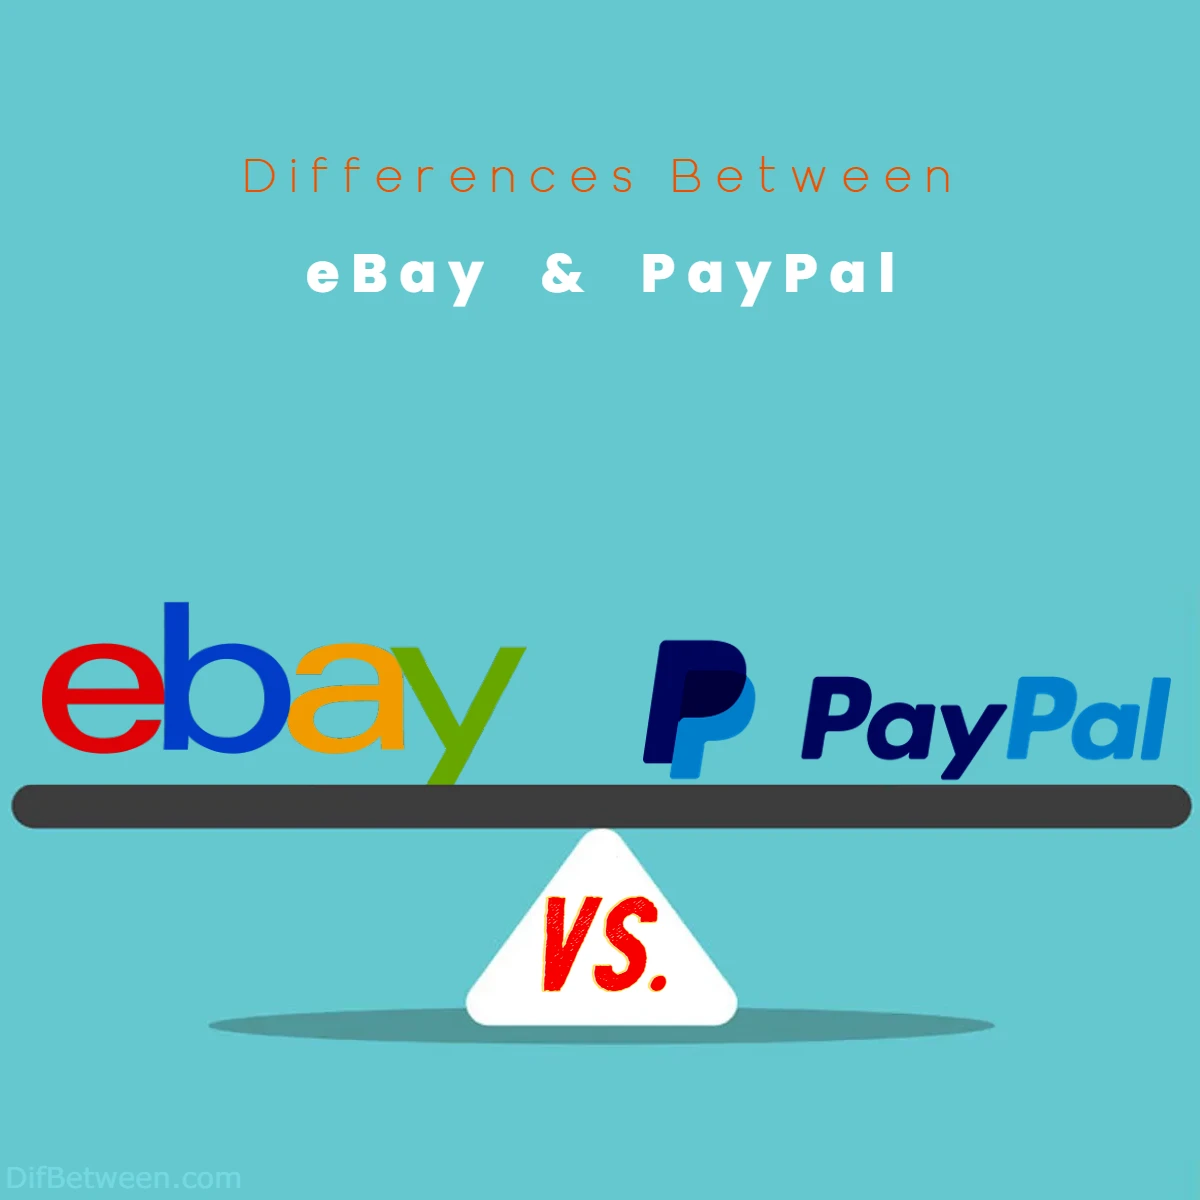 Differences Between eBay vs PayPal